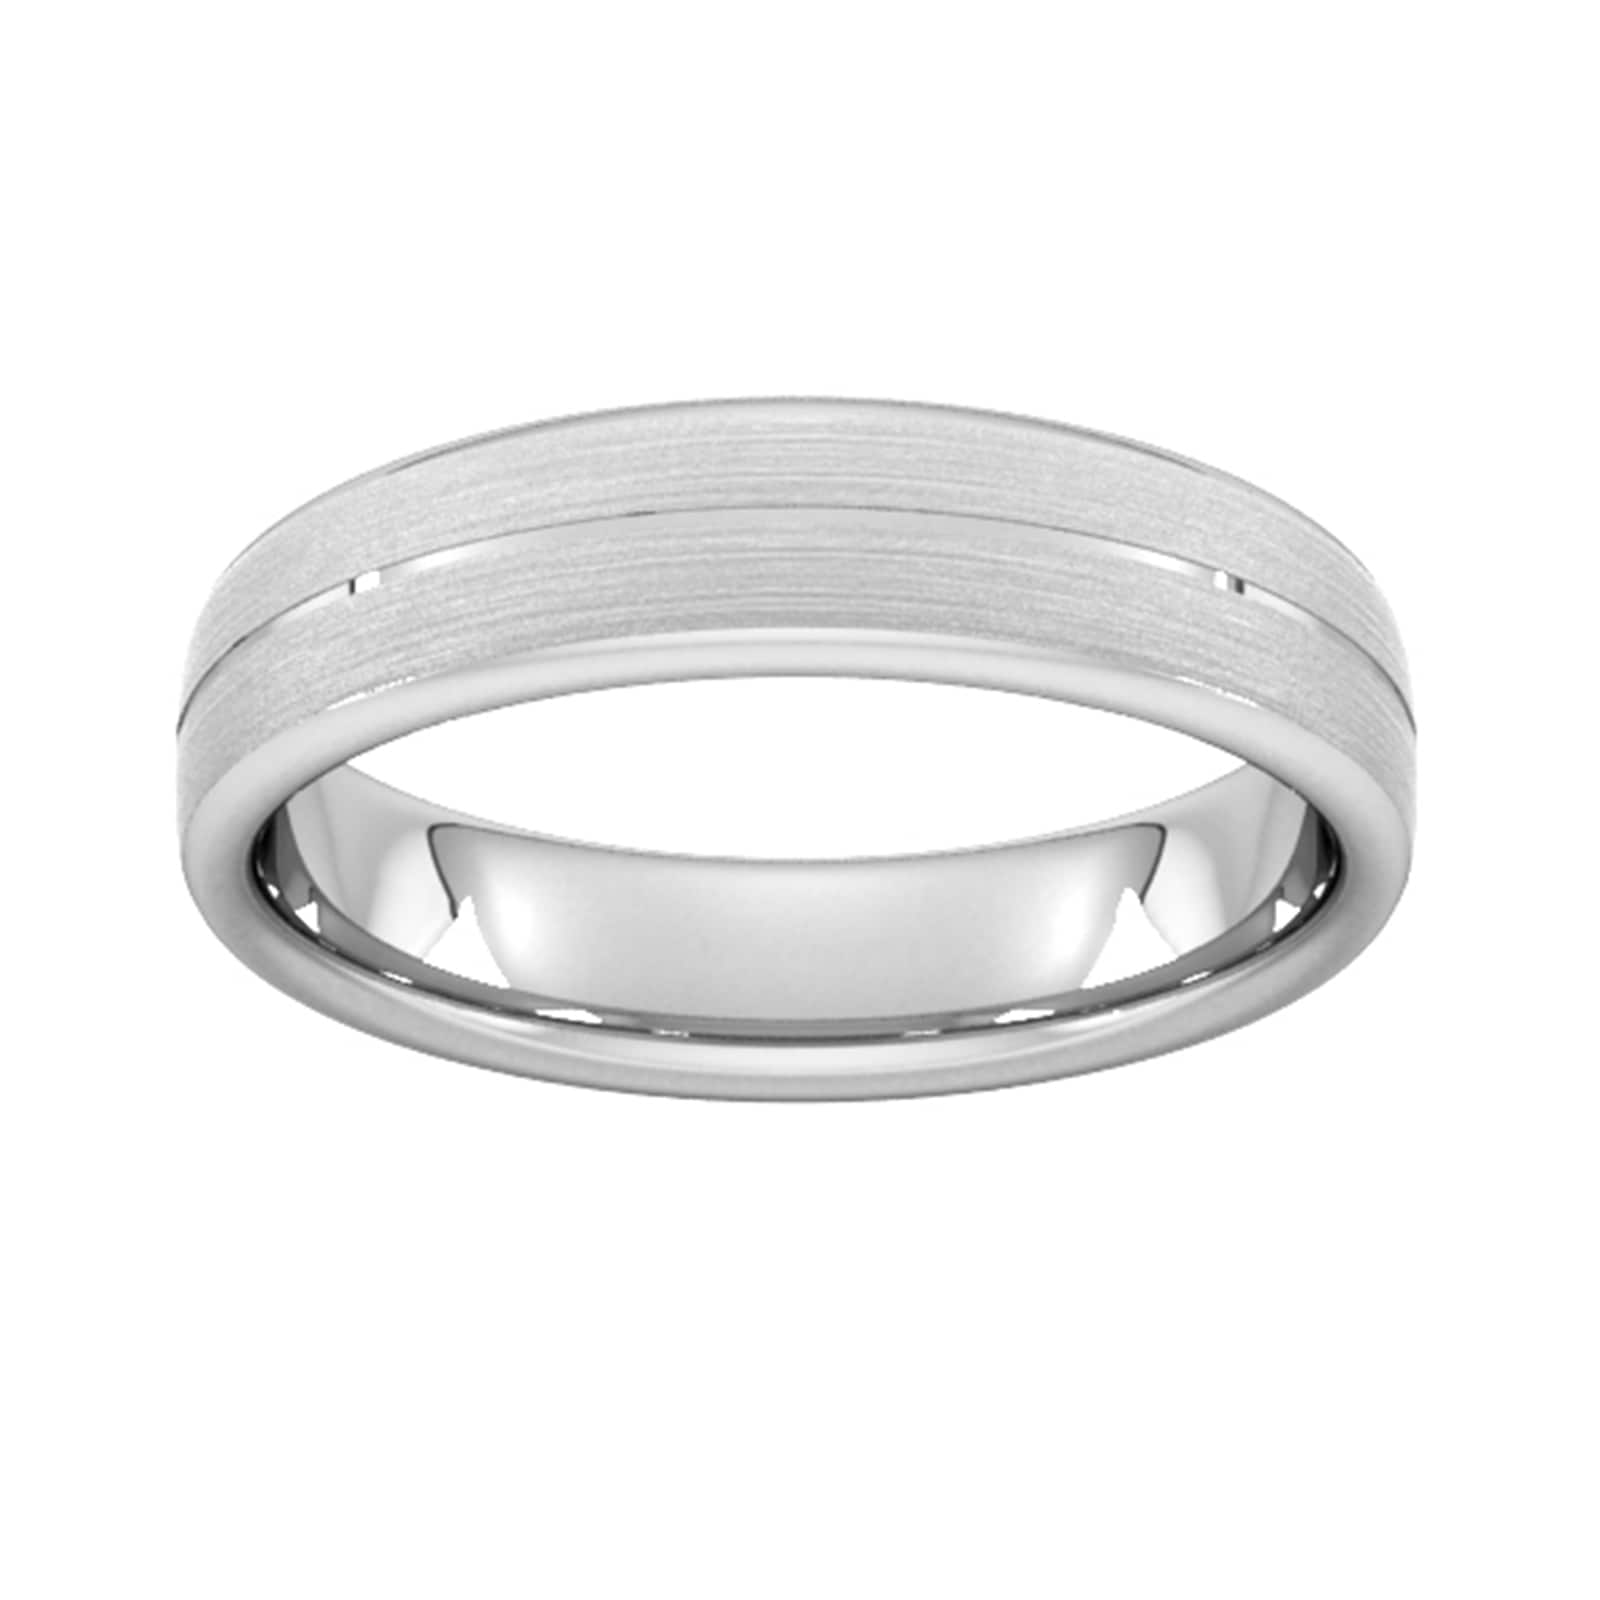 5mm Slight Court Extra Heavy Centre Groove With Chamfered Edge Wedding Ring In 950 Palladium - Ring Size L